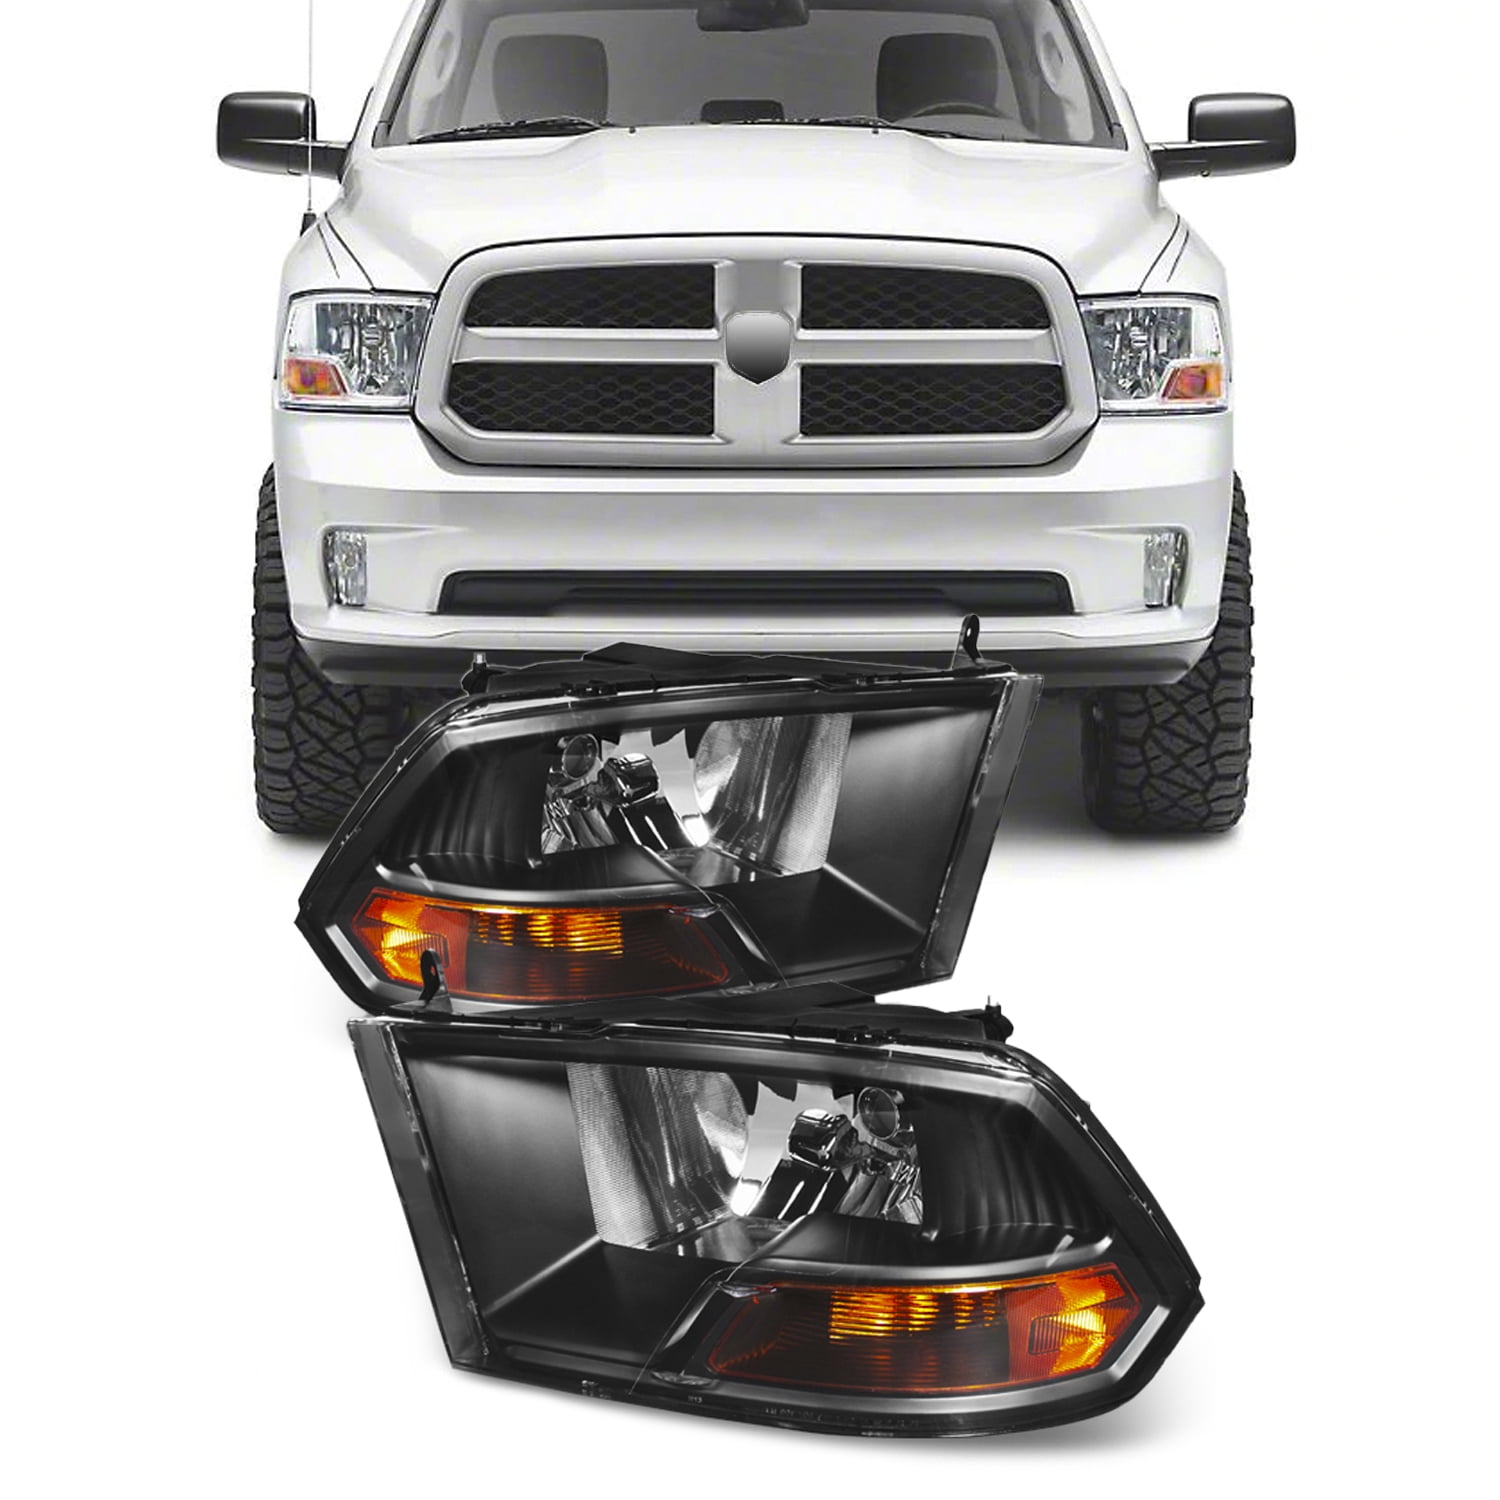 Driving And Passenger Side Headlights Fit for 2009-2018 Dodge Ram 1500 2500 3500 Pickup Headlamp Assembly Black